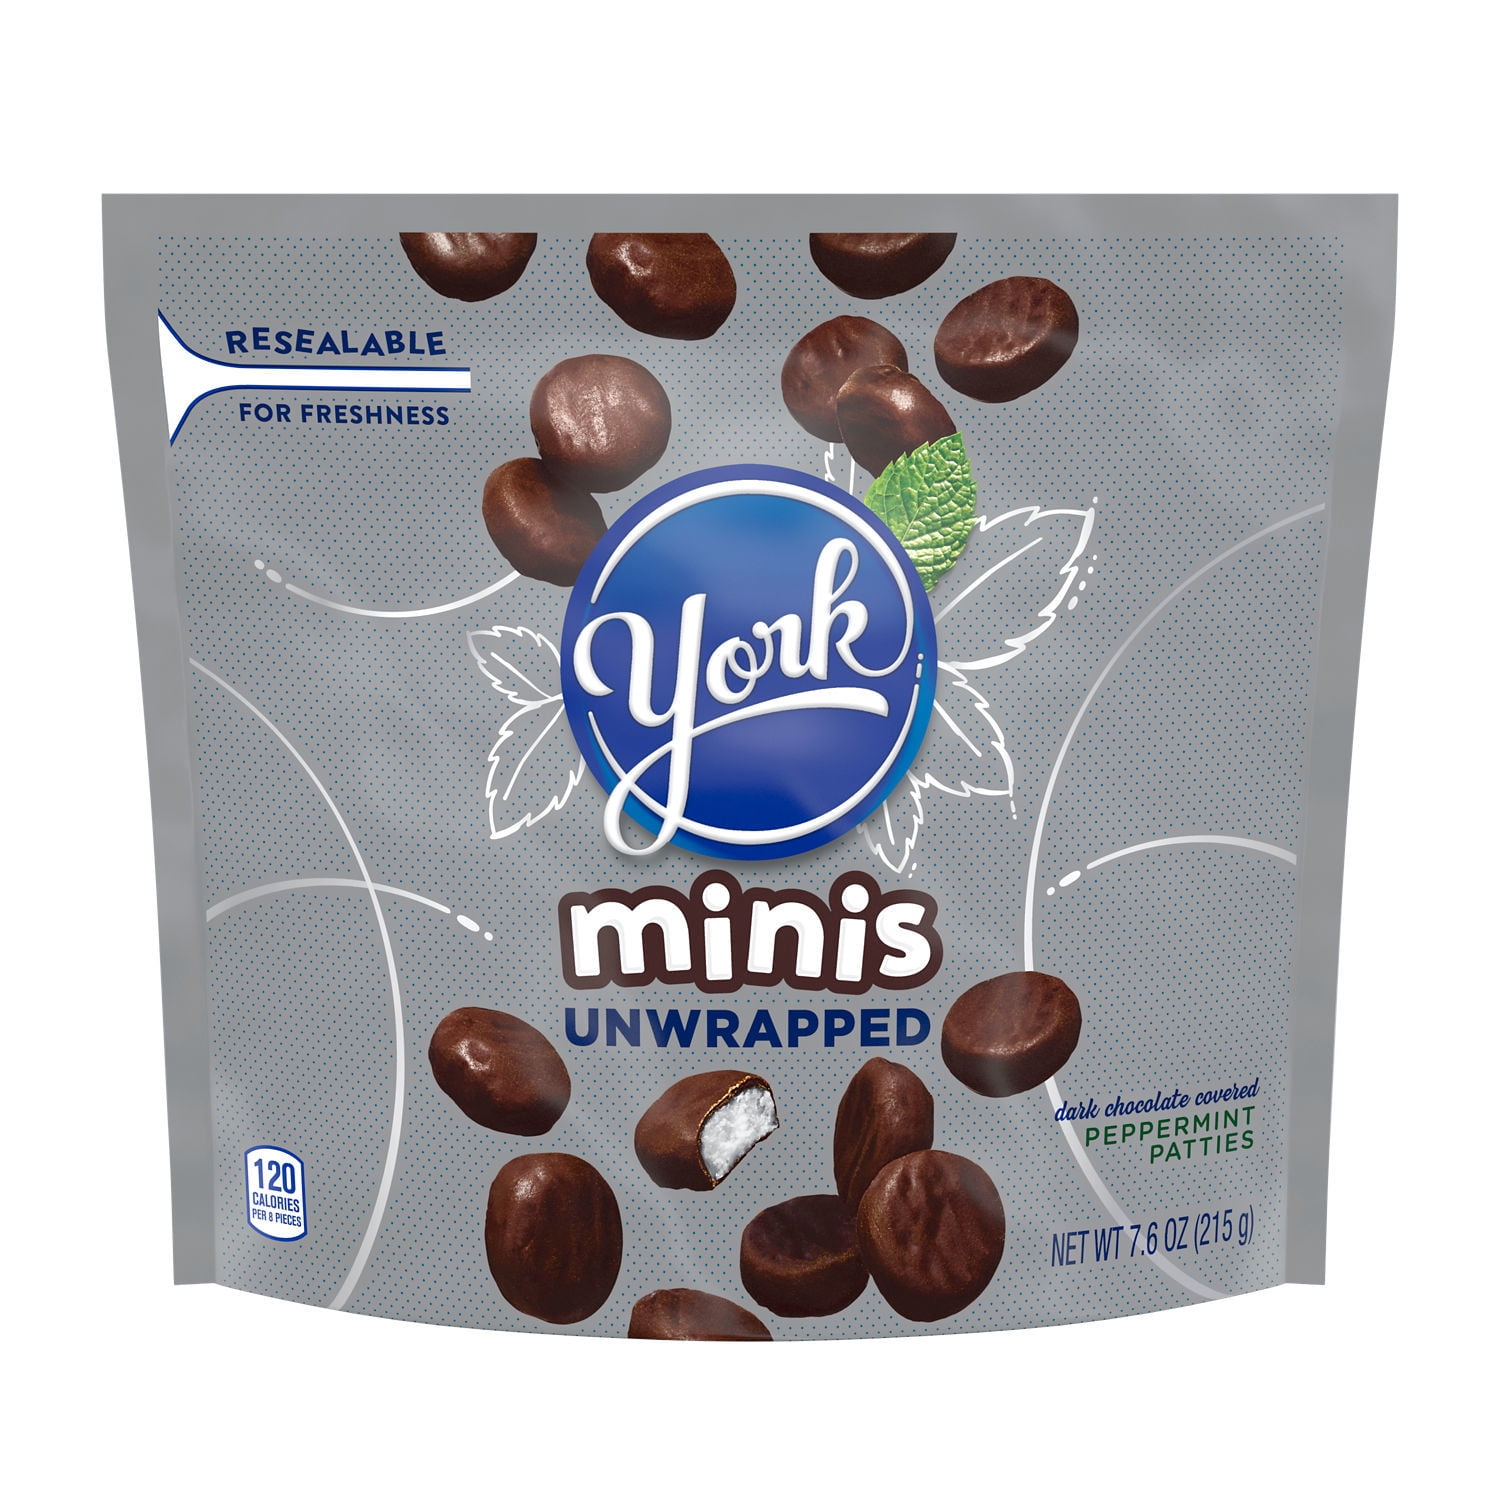 YORK, Minis Dark Chocolate Unwrapped Peppermint Pattie Candy, Gluten Free, 7.6 oz, Resealable Pack